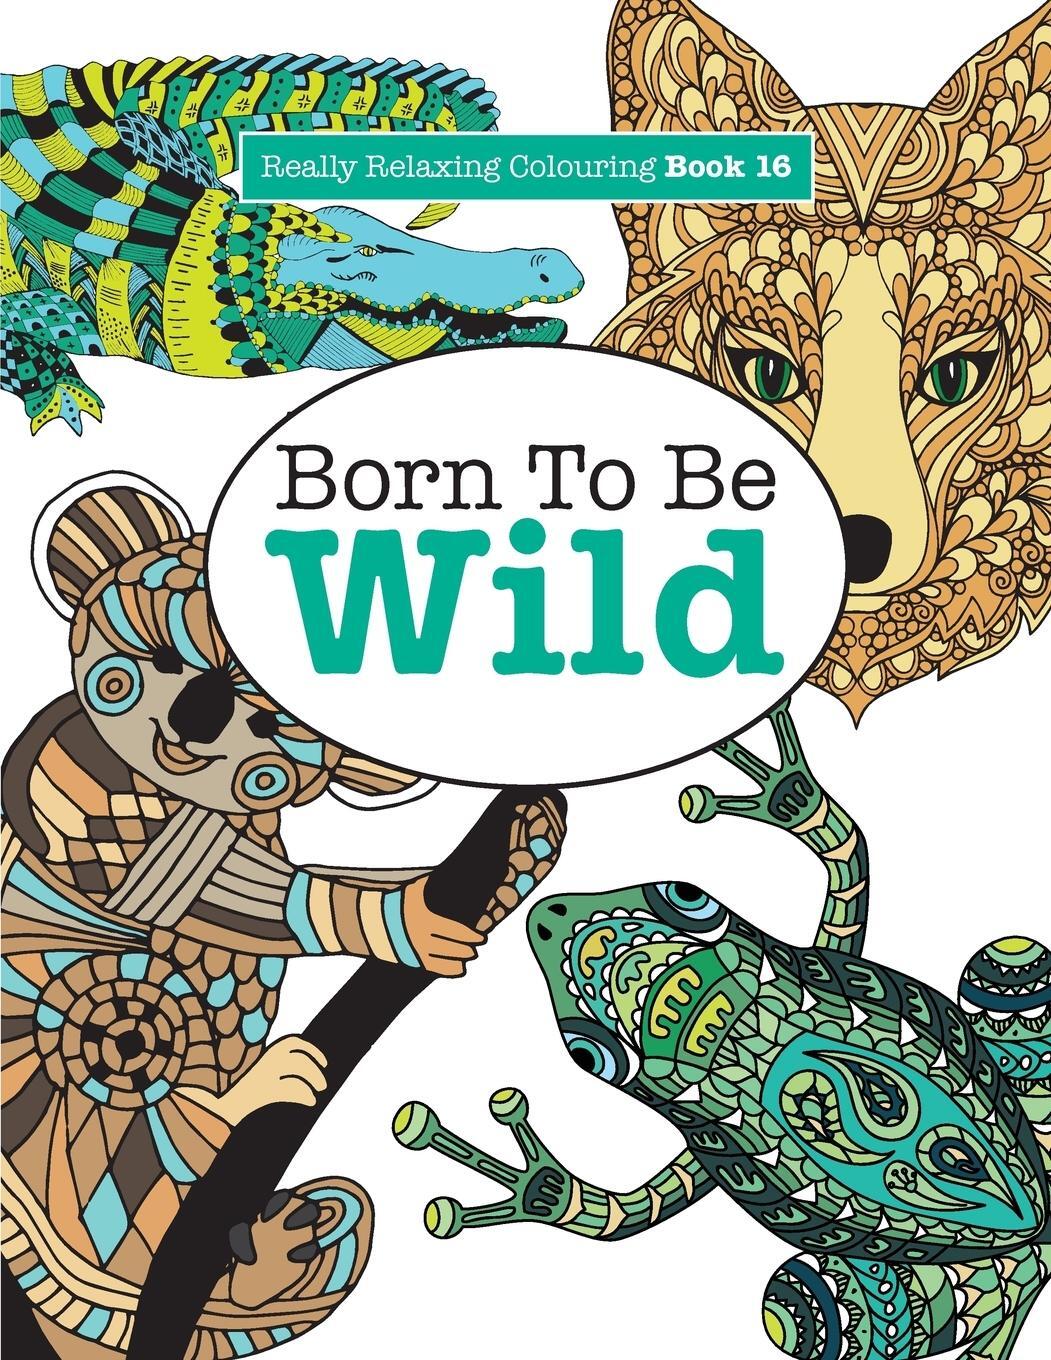 Cover: 9781785950940 | Really Relaxing Colouring Book 16 | Born To Be Wild | Elizabeth James